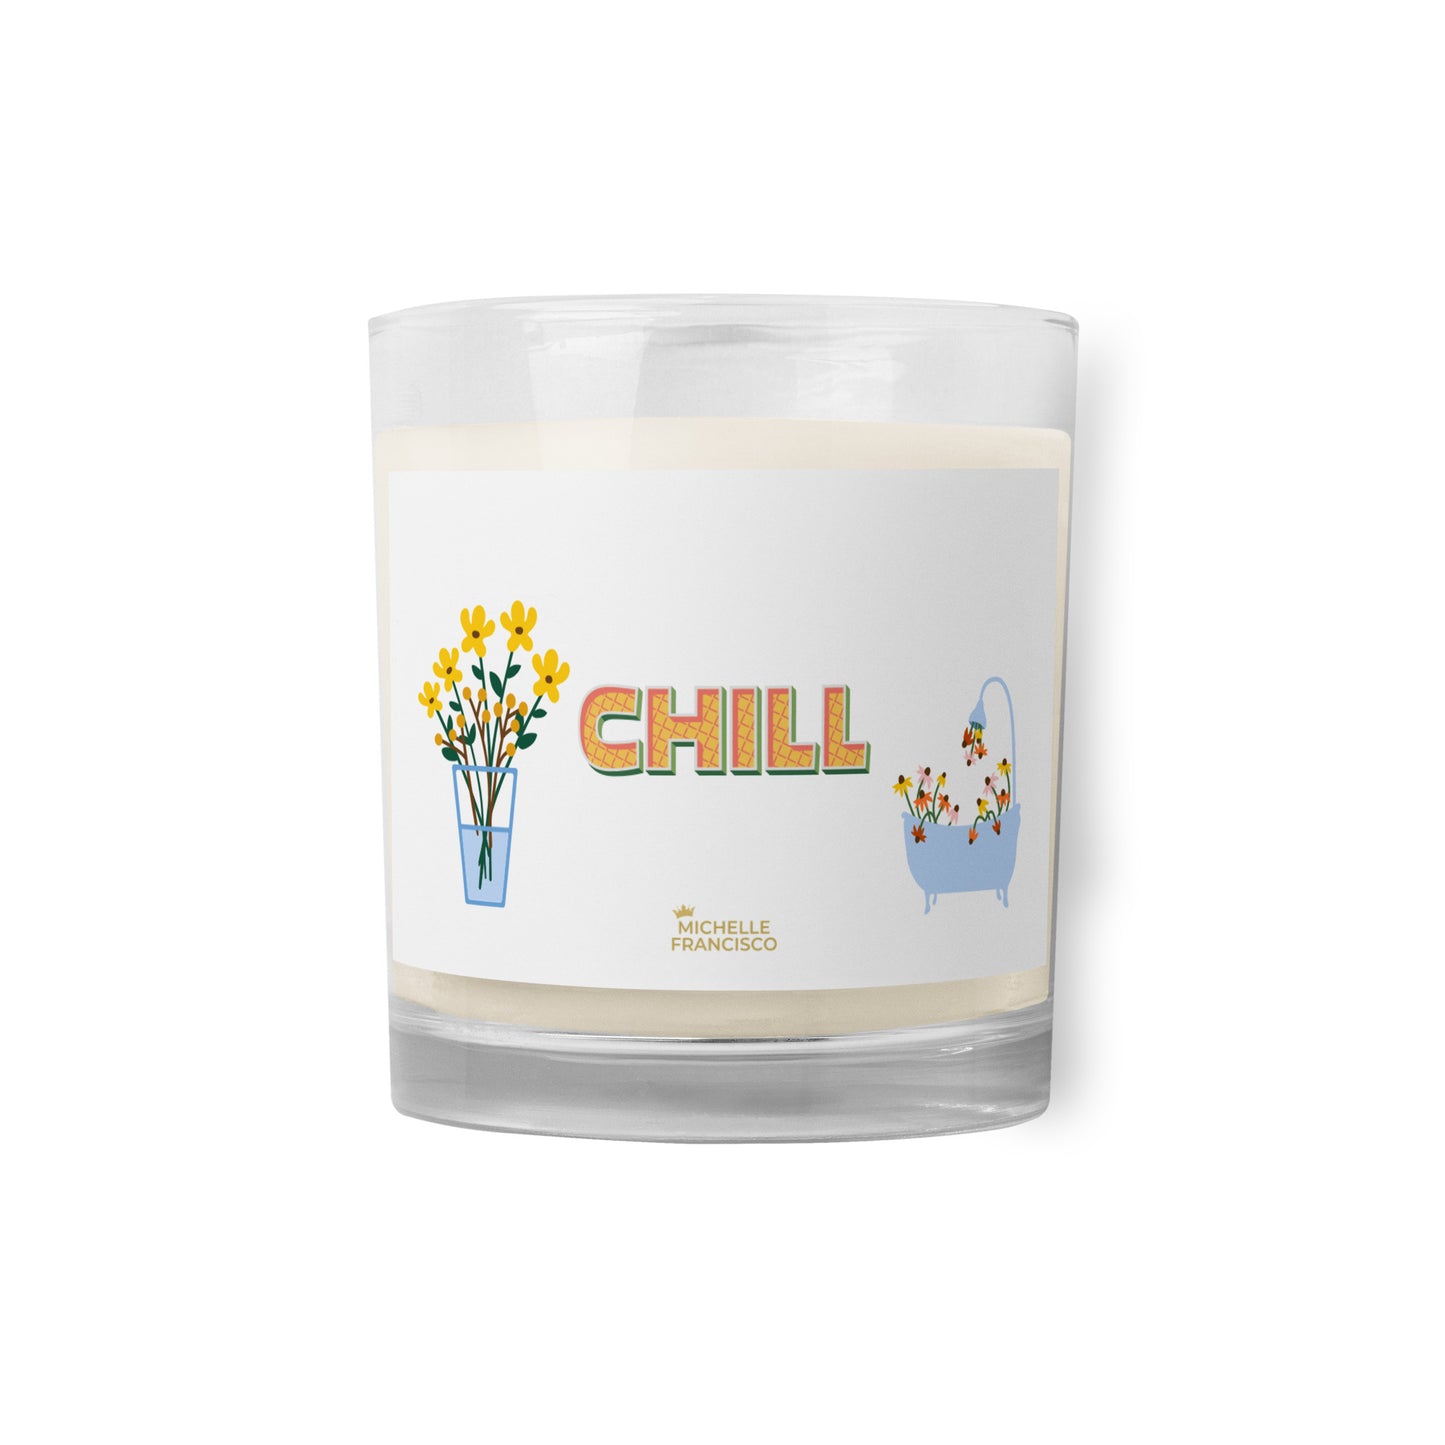 Chill Glass Jar Soy Wax Candle